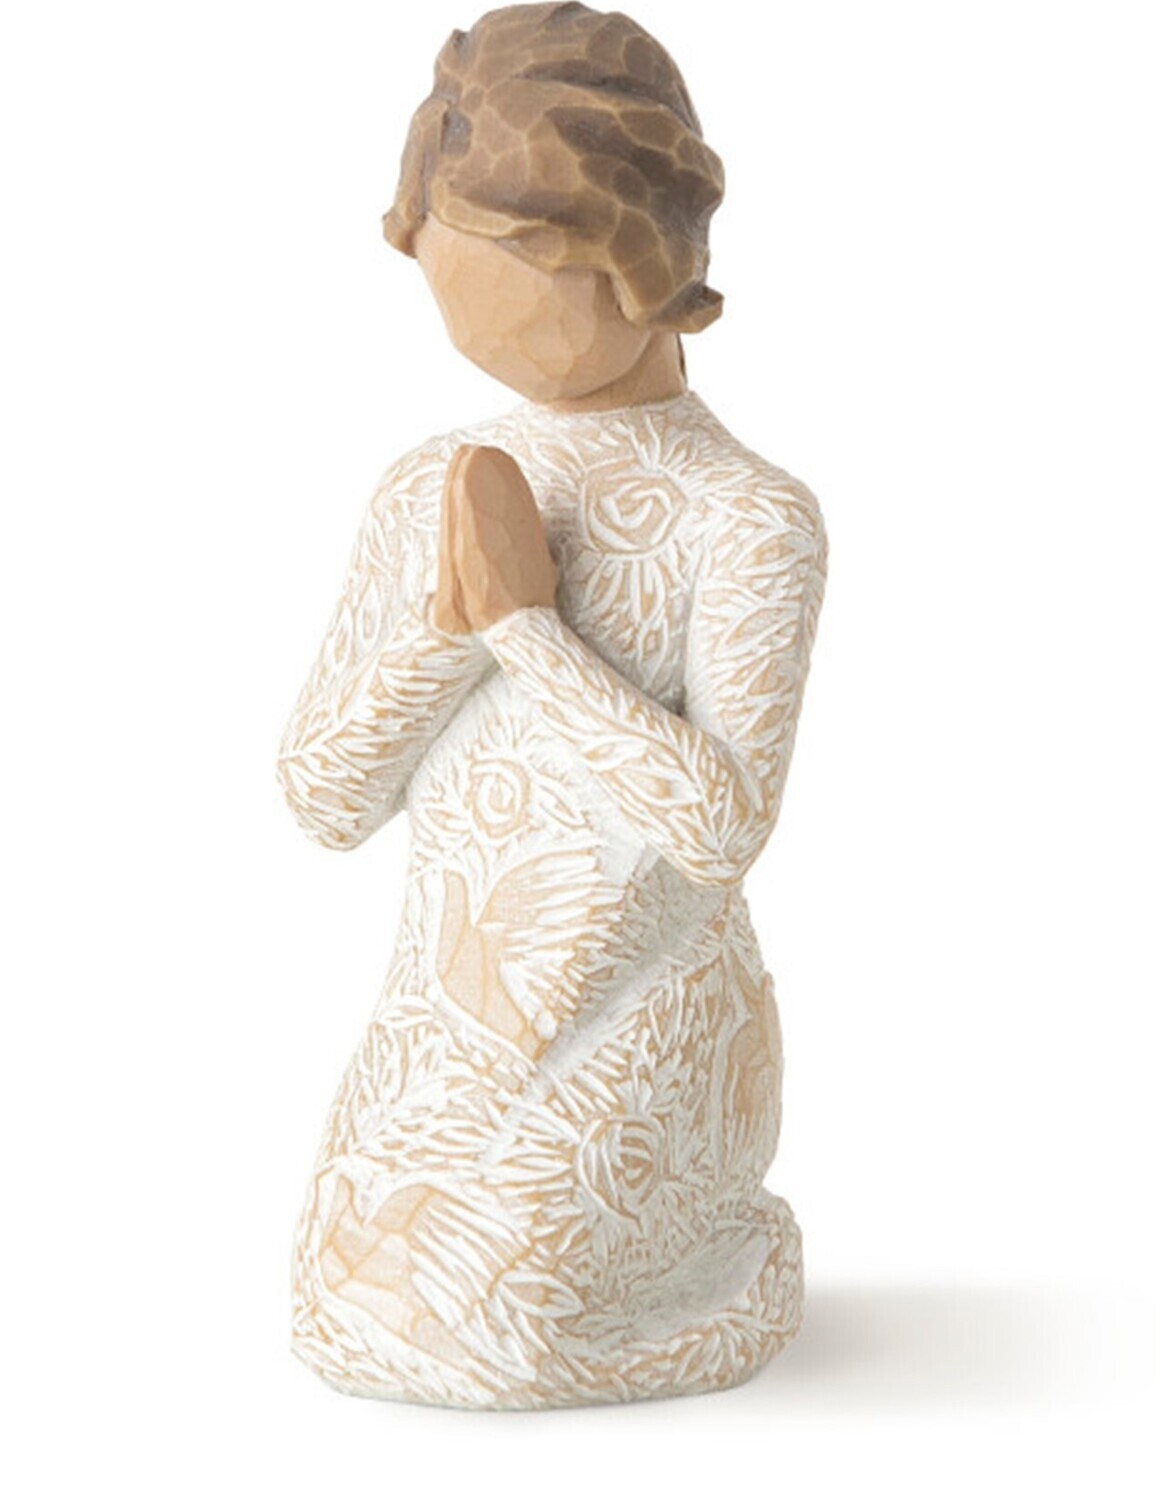 Willow Tree "Prayer of Peace - Seeking the Quiet Within" 4" Figurine (27158)